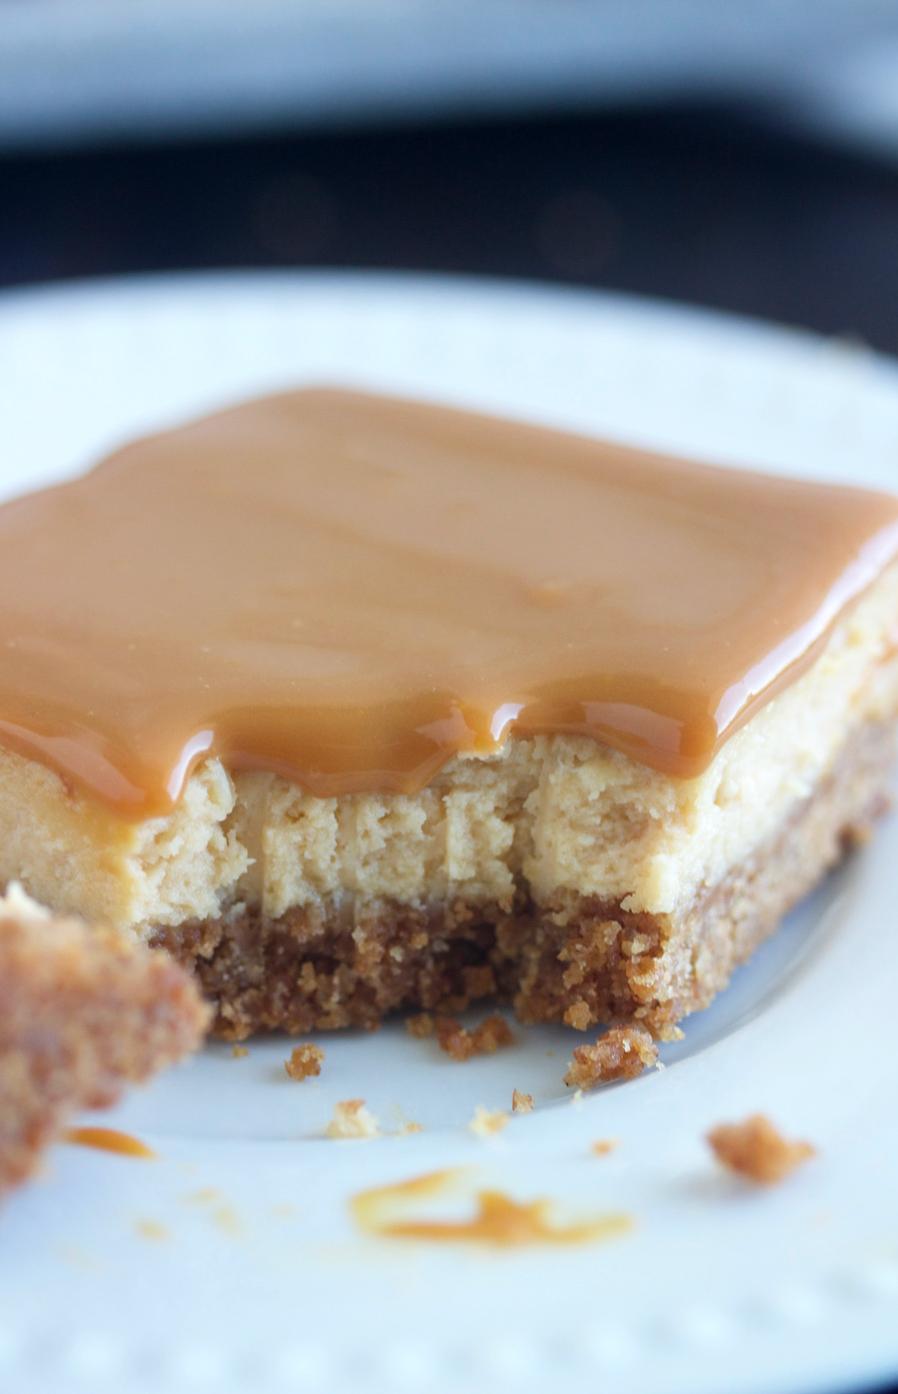  Get ready to indulge in cheesecake heaven with these Dulce De Leche Cheesecake Squares.